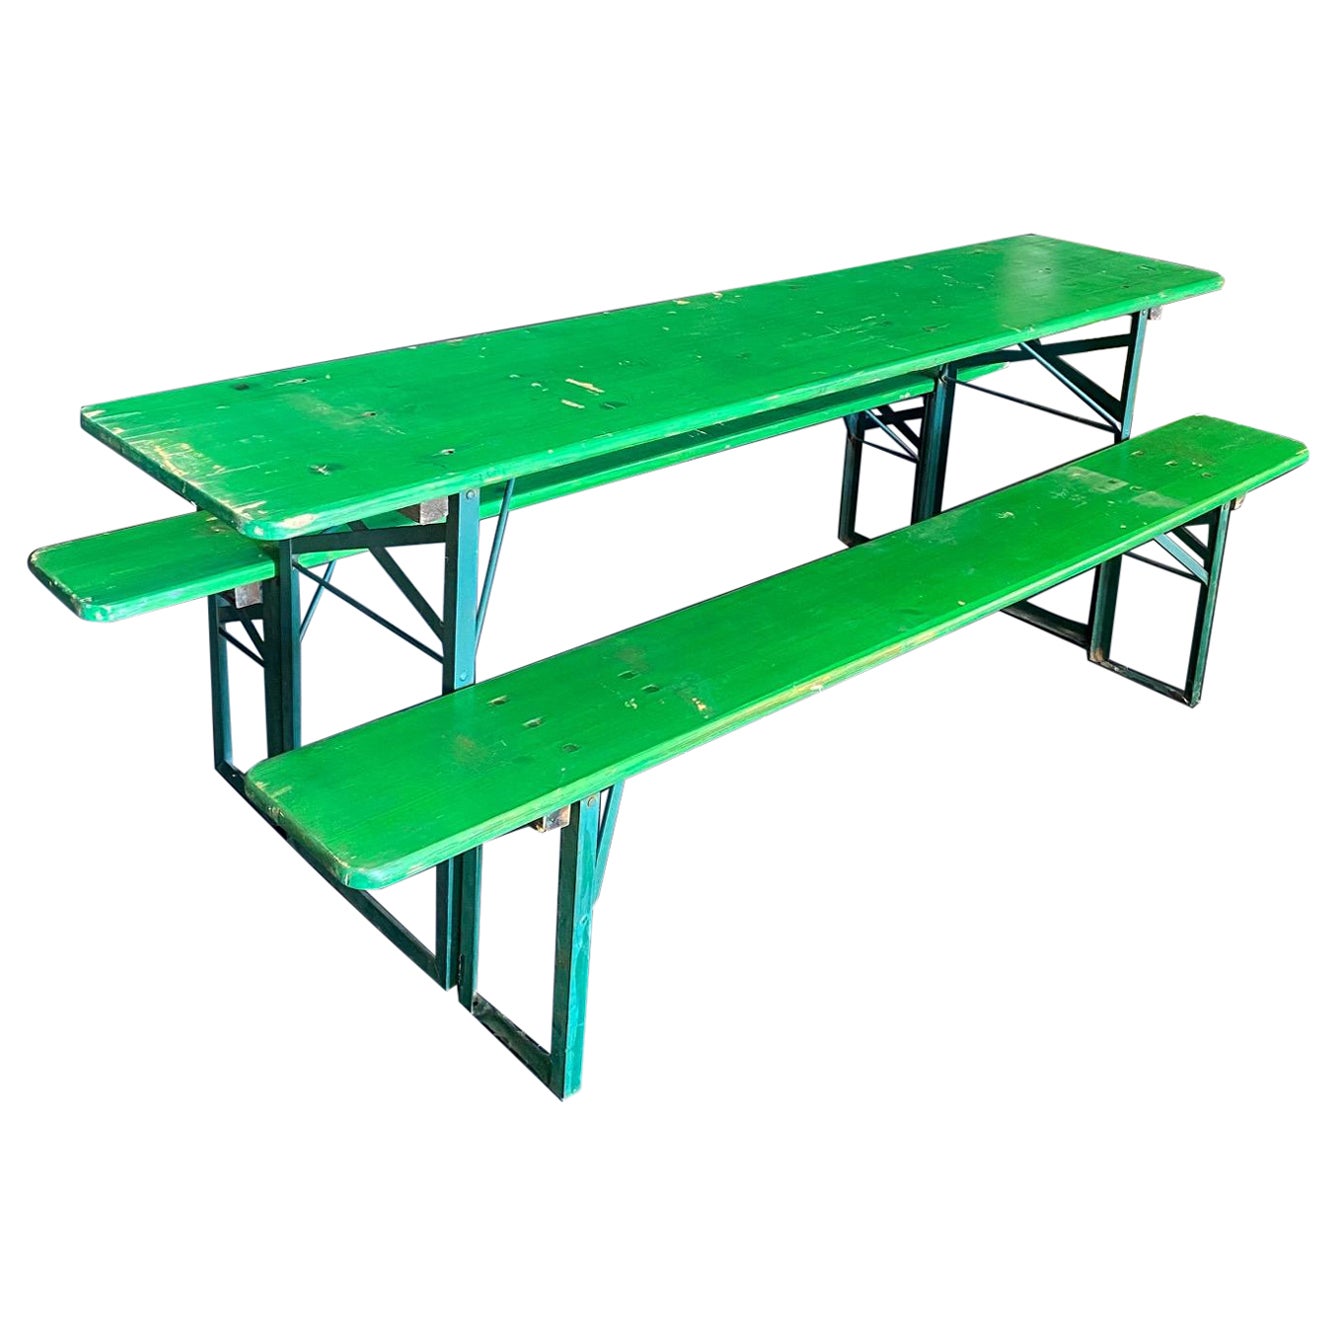 Fun Authentic Vintage Collapsible German Beer Garden Table and Bench Set